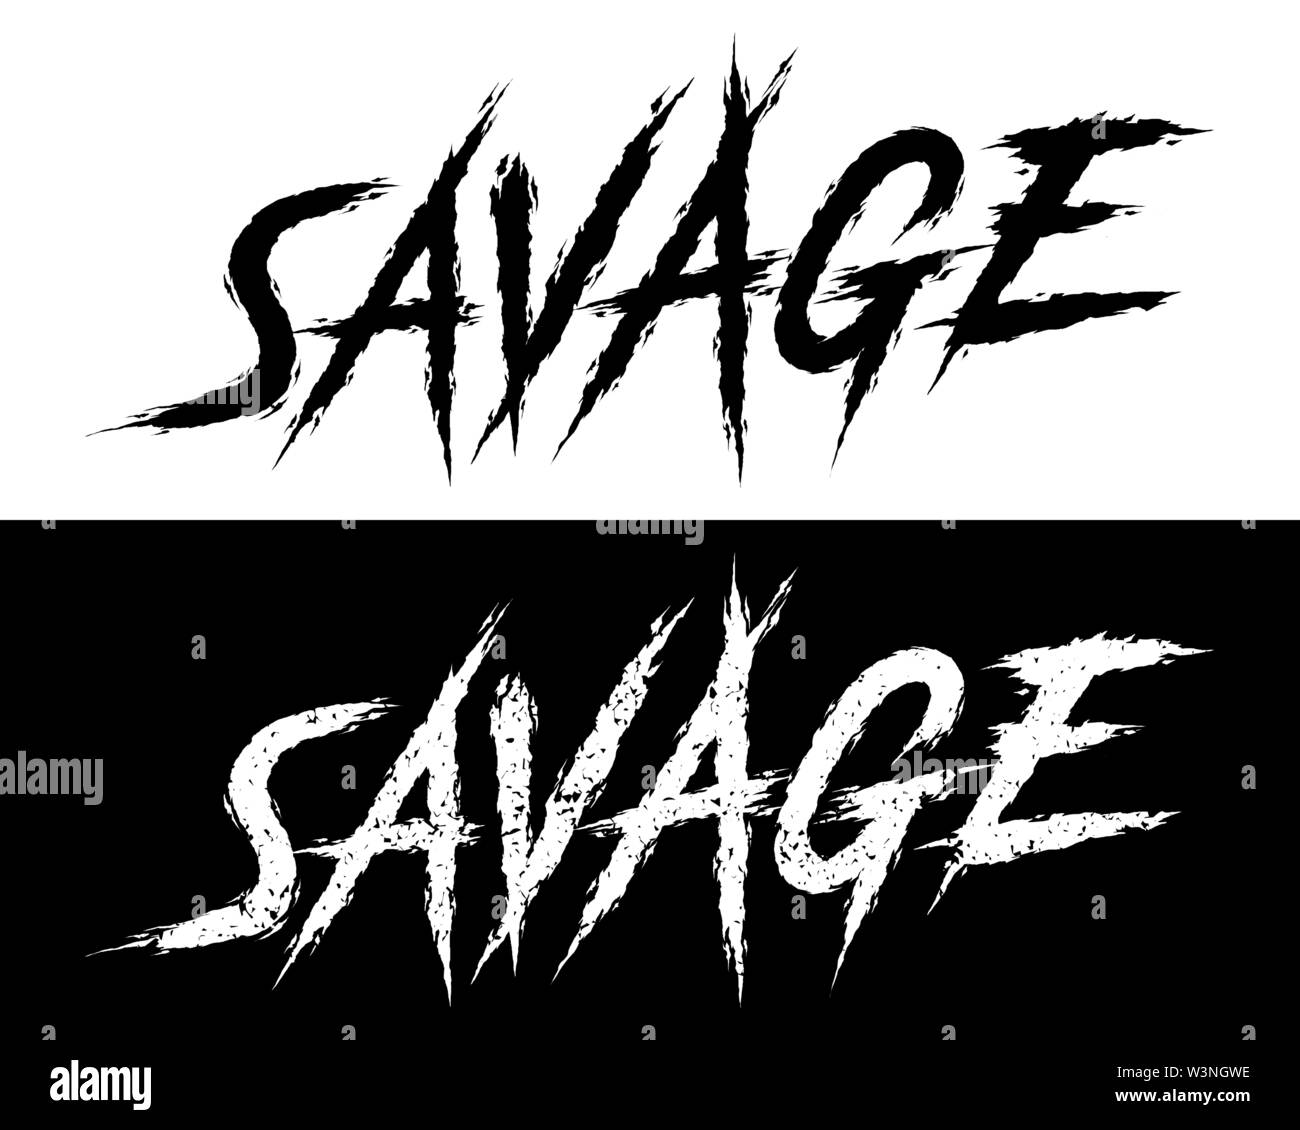 Savage. Set of 2 Brush painted letters on isolated background. Black and white, solid and distressed. Vector illustration for t shirt design, print, p Stock Vector